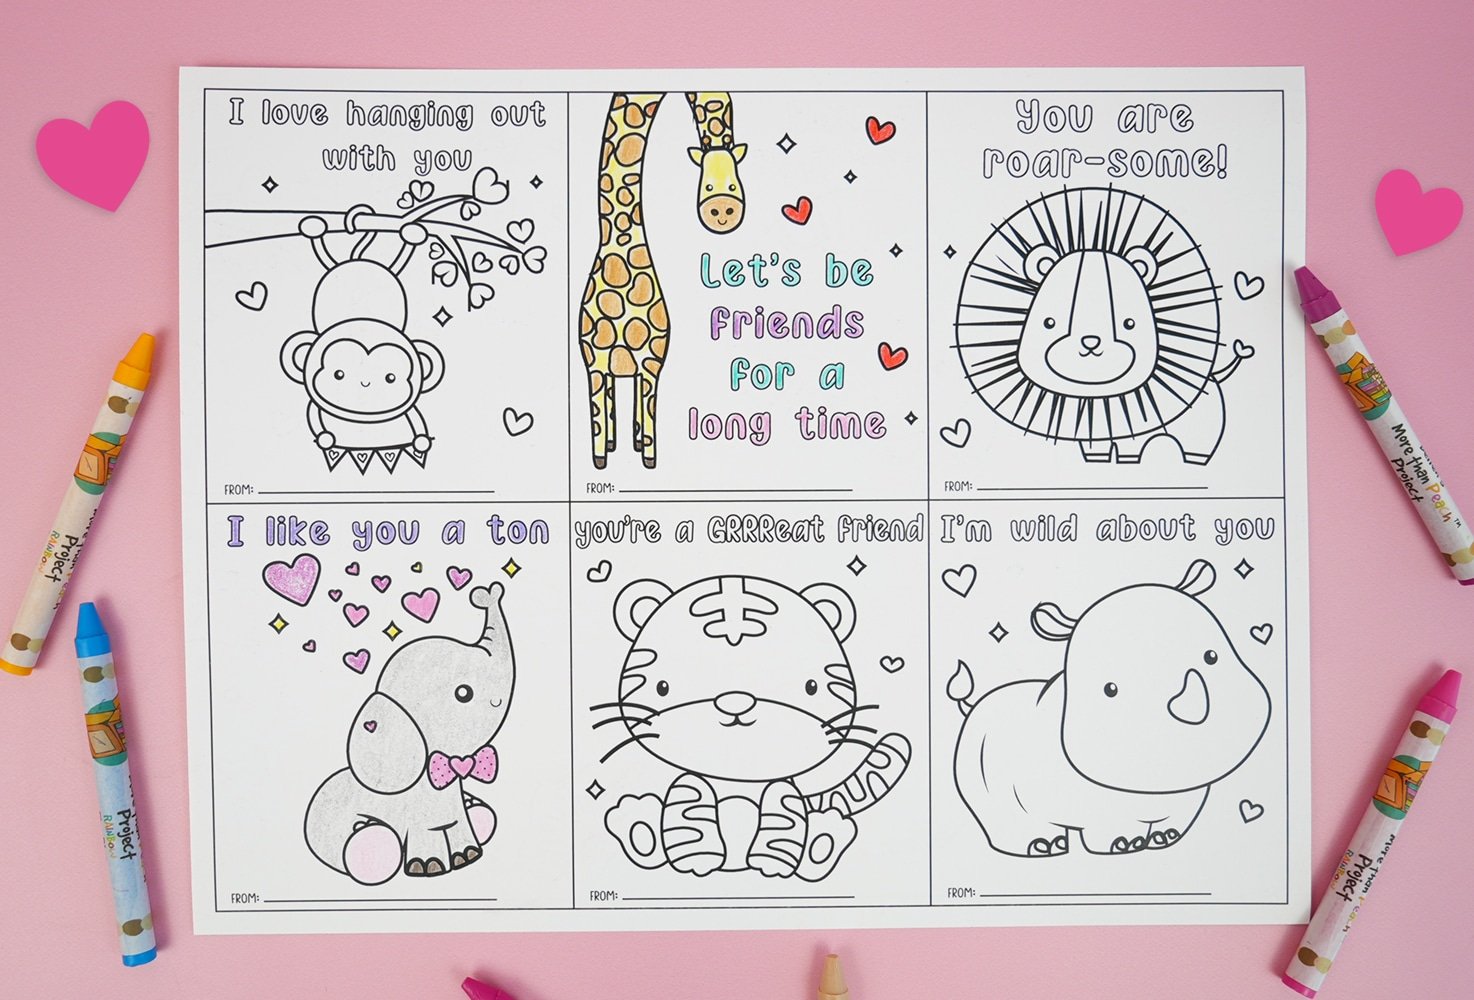 Jungle animals coloring valentine cards on pink background with hearts and crayons